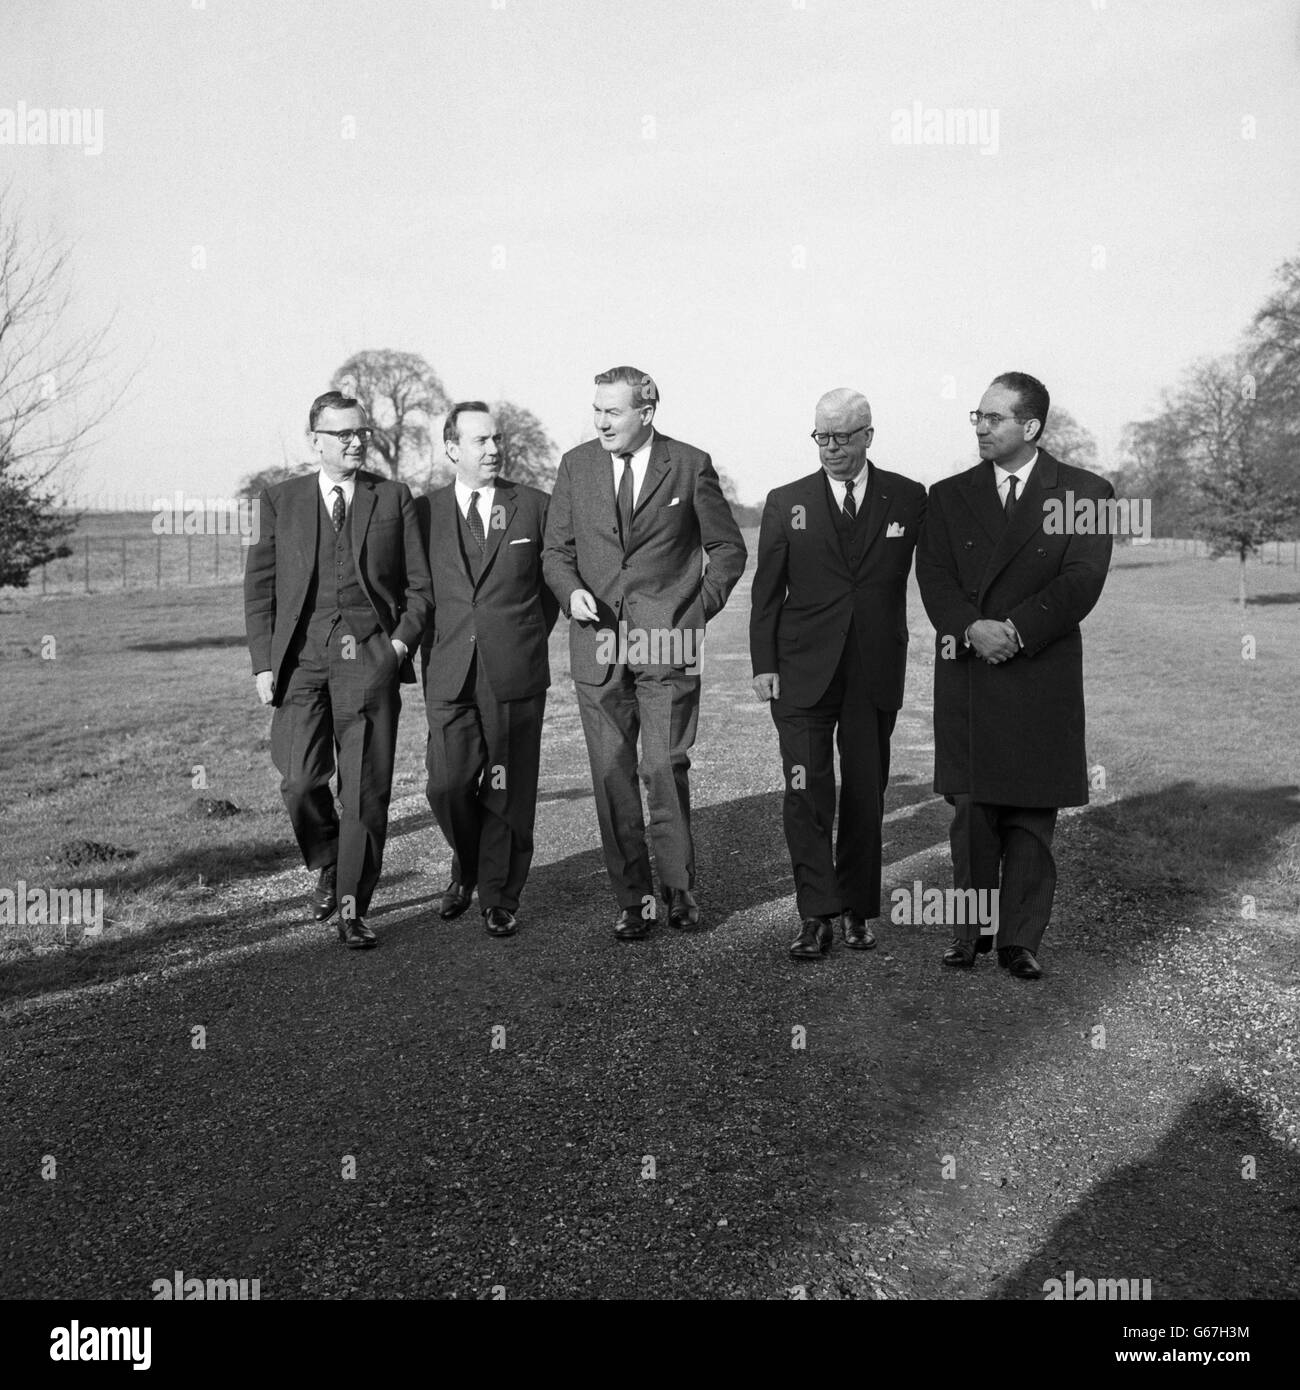 Finance ministers from five nations stroll through the gardens at Chequers, where they met to discuss the international interaction of their respective economic policies. (l-r) Professor Karl Schiller from Germany, Michel Debre from France, Britain's James Callaghan, Henry Fowler from the United States and Emilio Colombo from Italy. 22/01/1967 Stock Photo